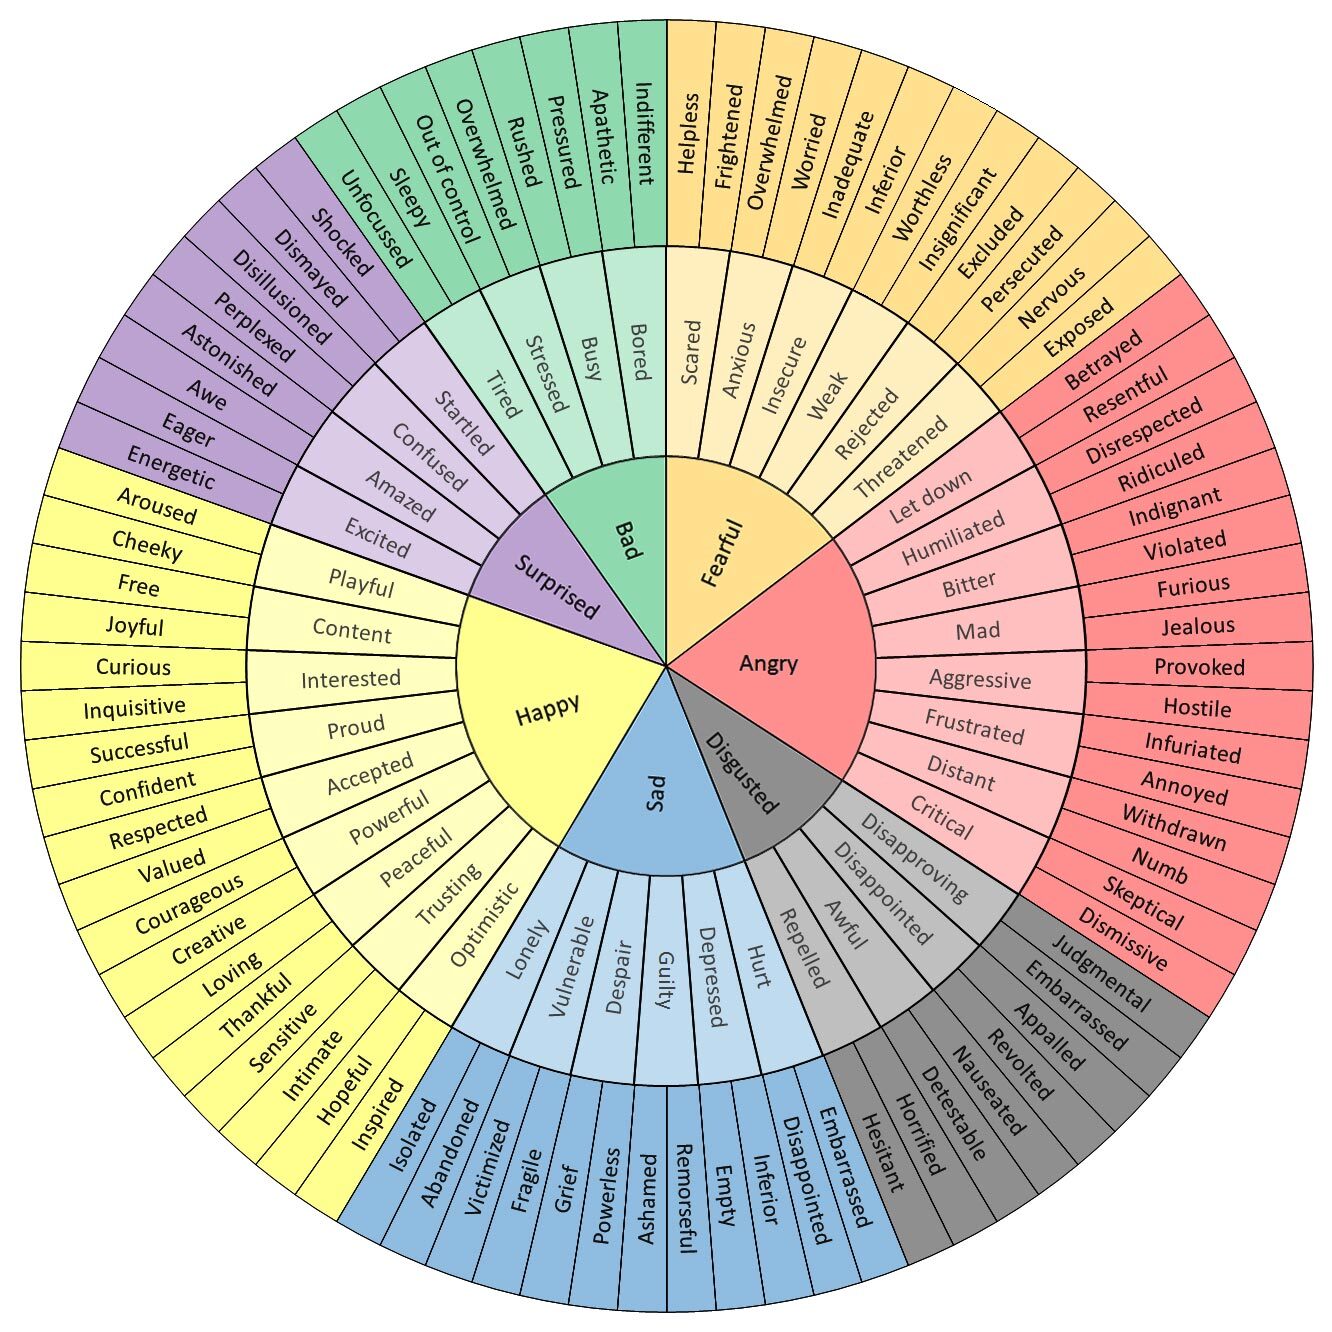 A "feelings wheel" that specifies feelings stemming from anger, disgust, sadness, happiness, surprise, bad and fear.